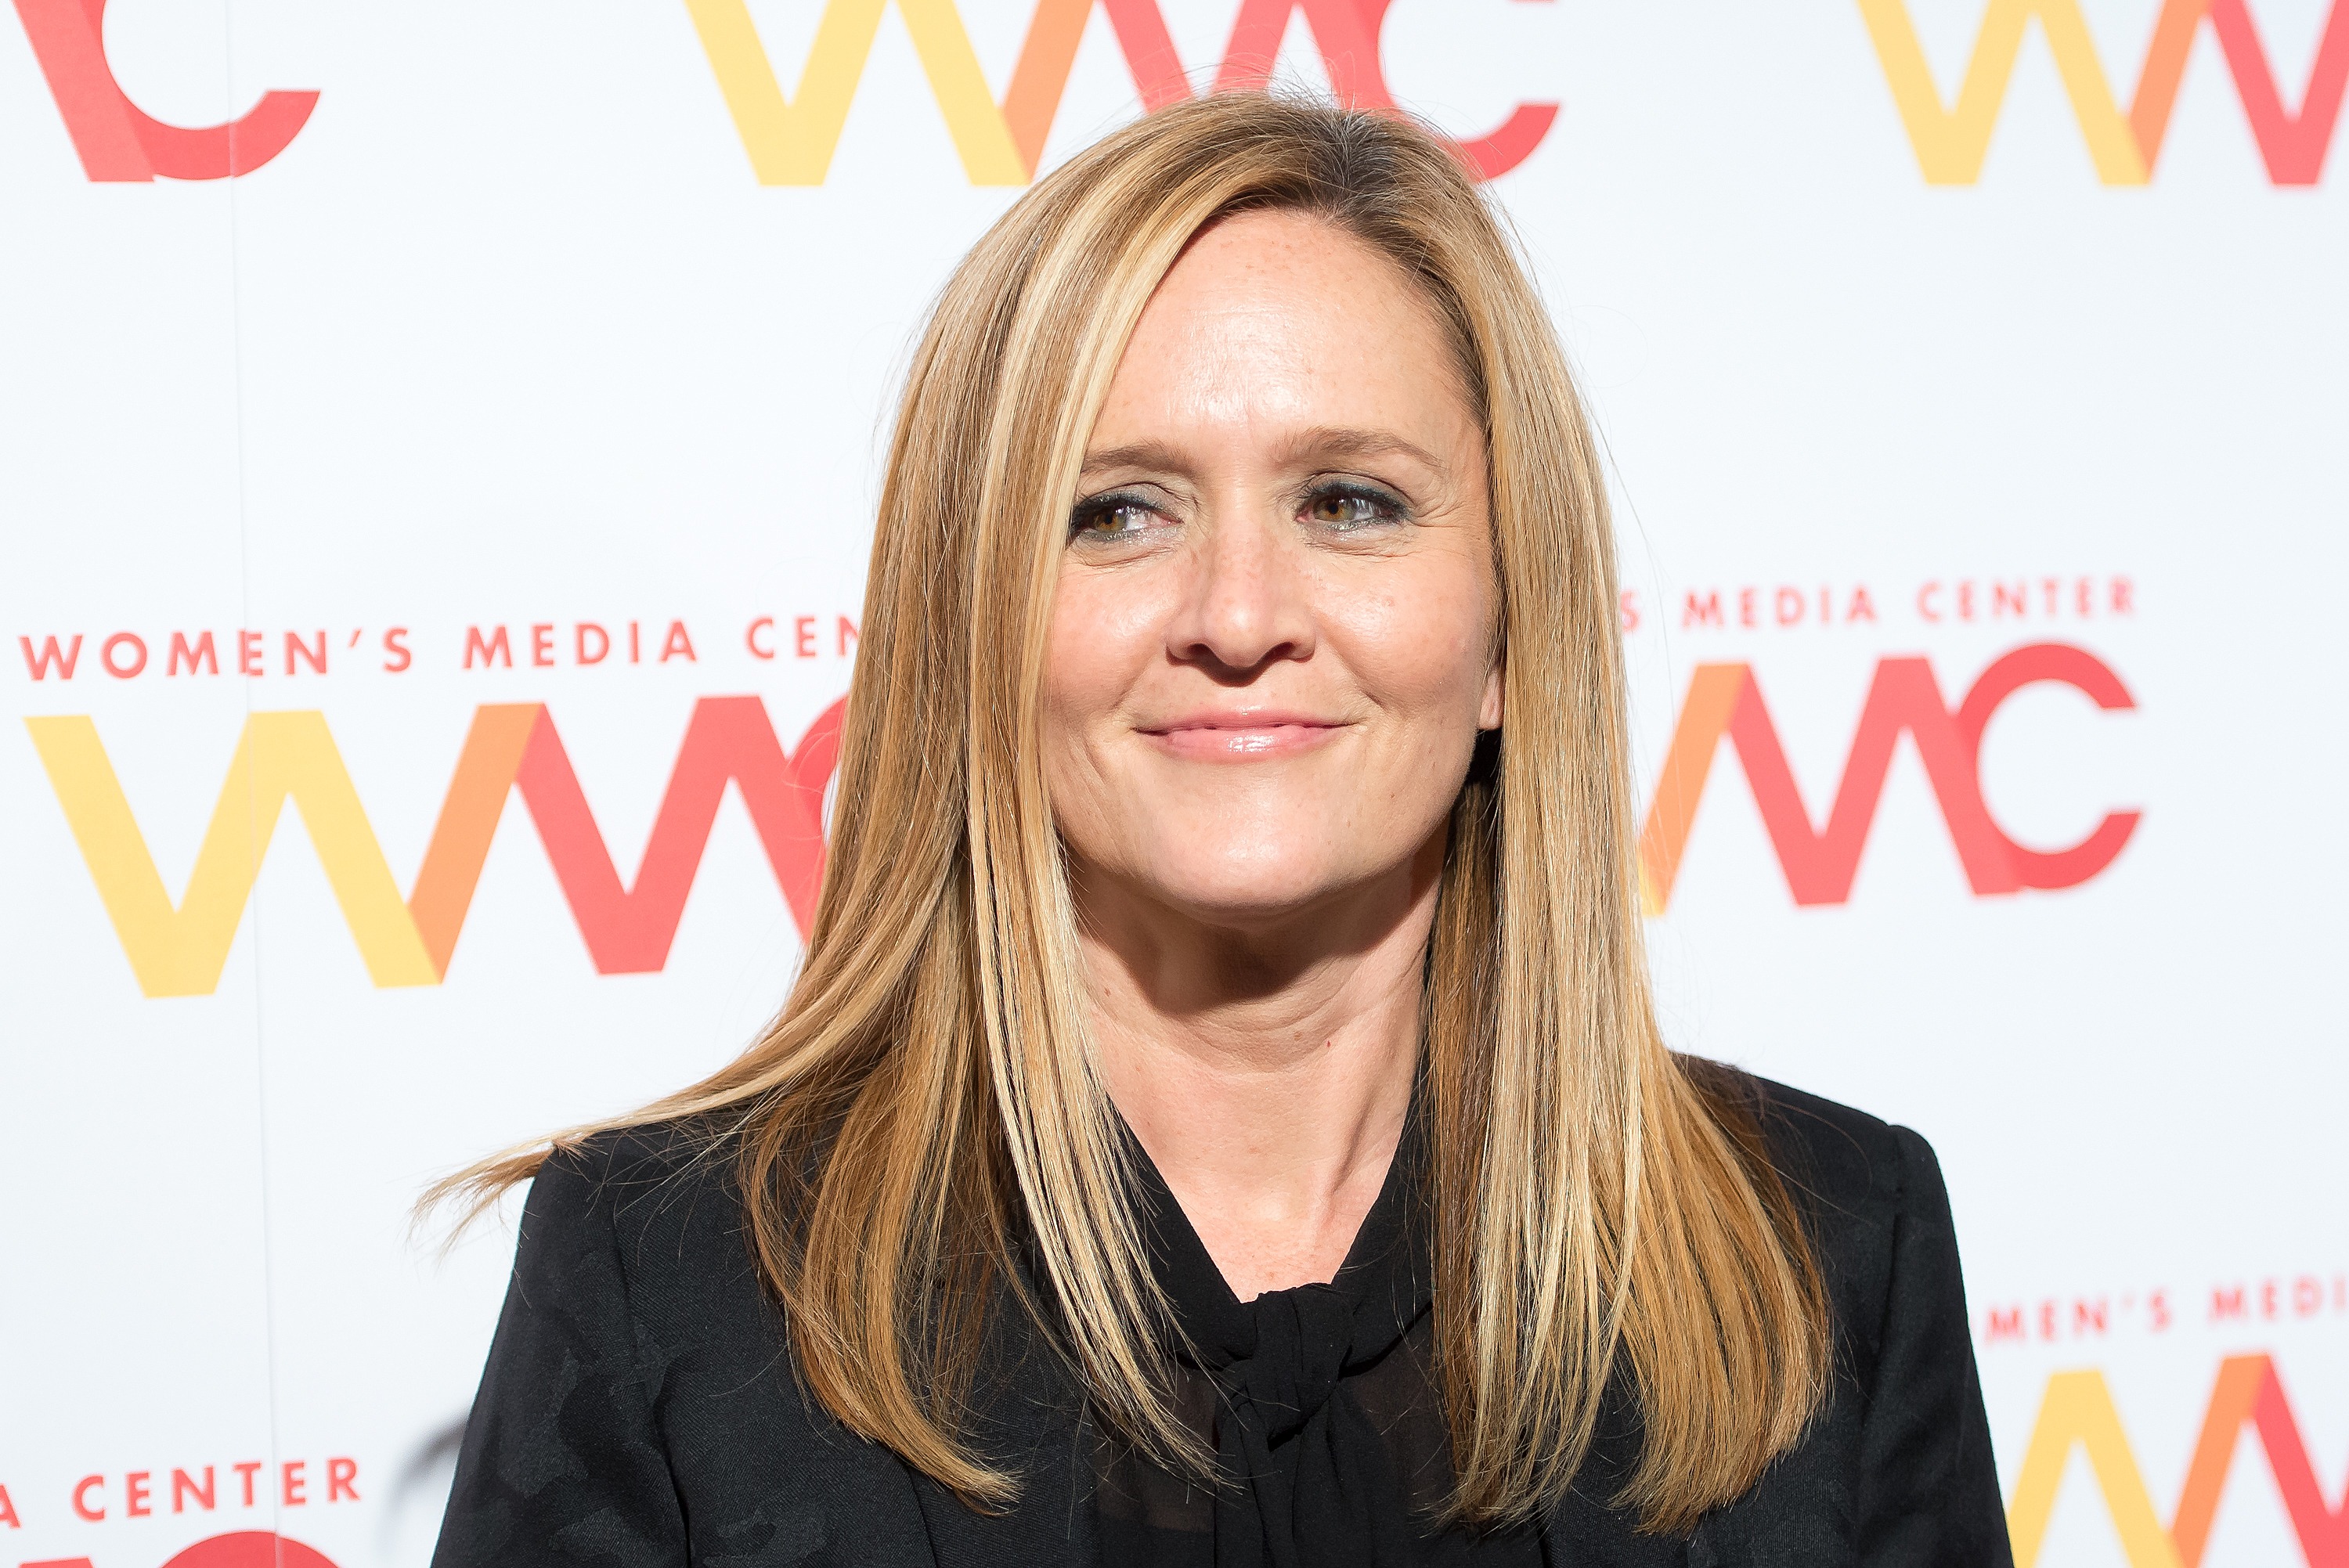 Samantha Bee attends The Women's Media Center 2016 Women's Media Awards at Capitale on September 29, 2016 in New York City. (Mike Pont—WireImage/Getty Images)